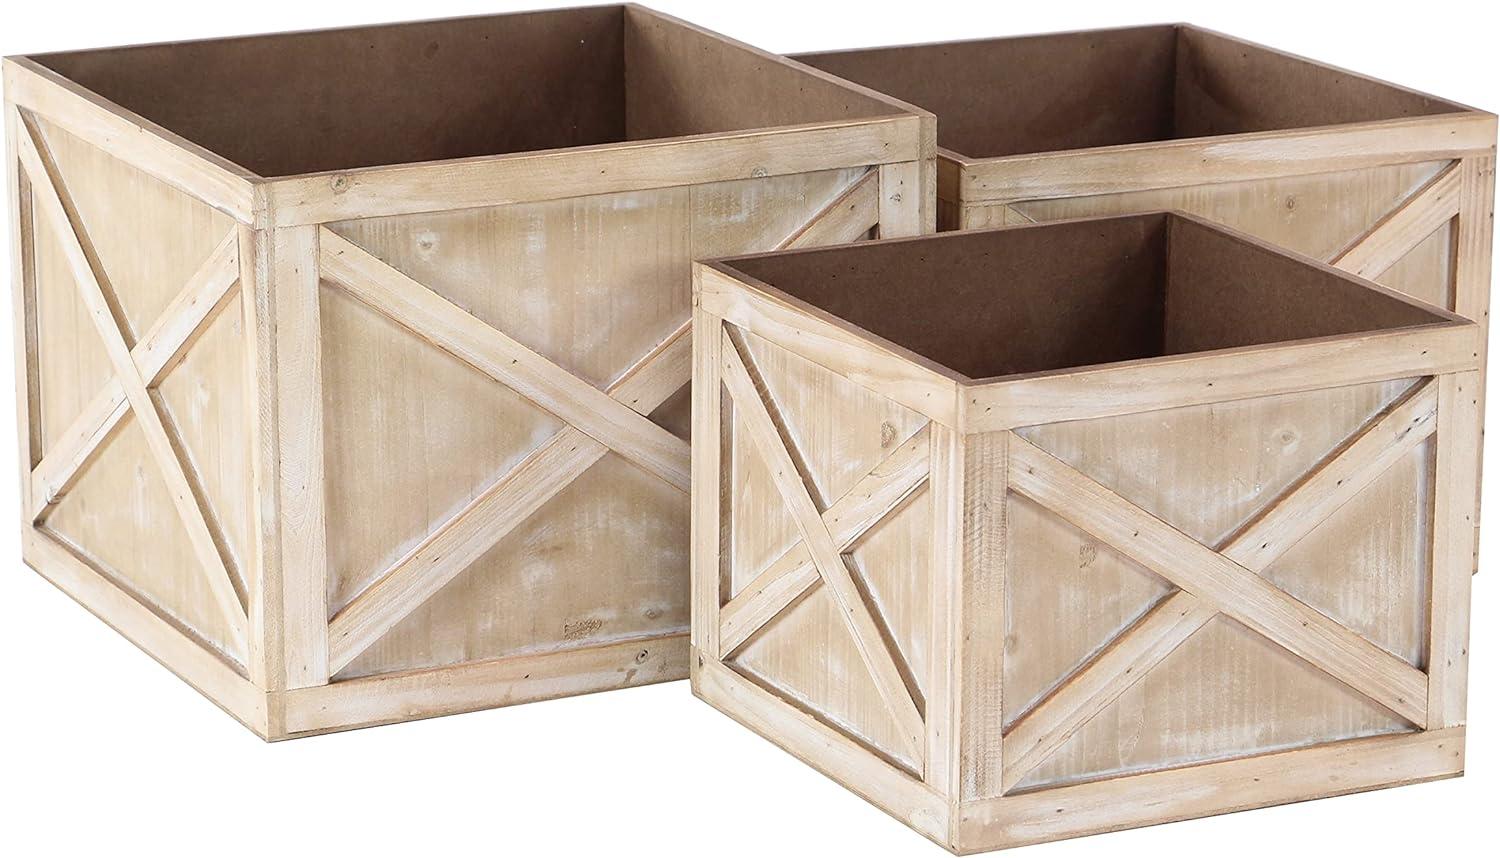 Light Brown Solid Square Wooden Planters Set of 3 for Indoor/Outdoor